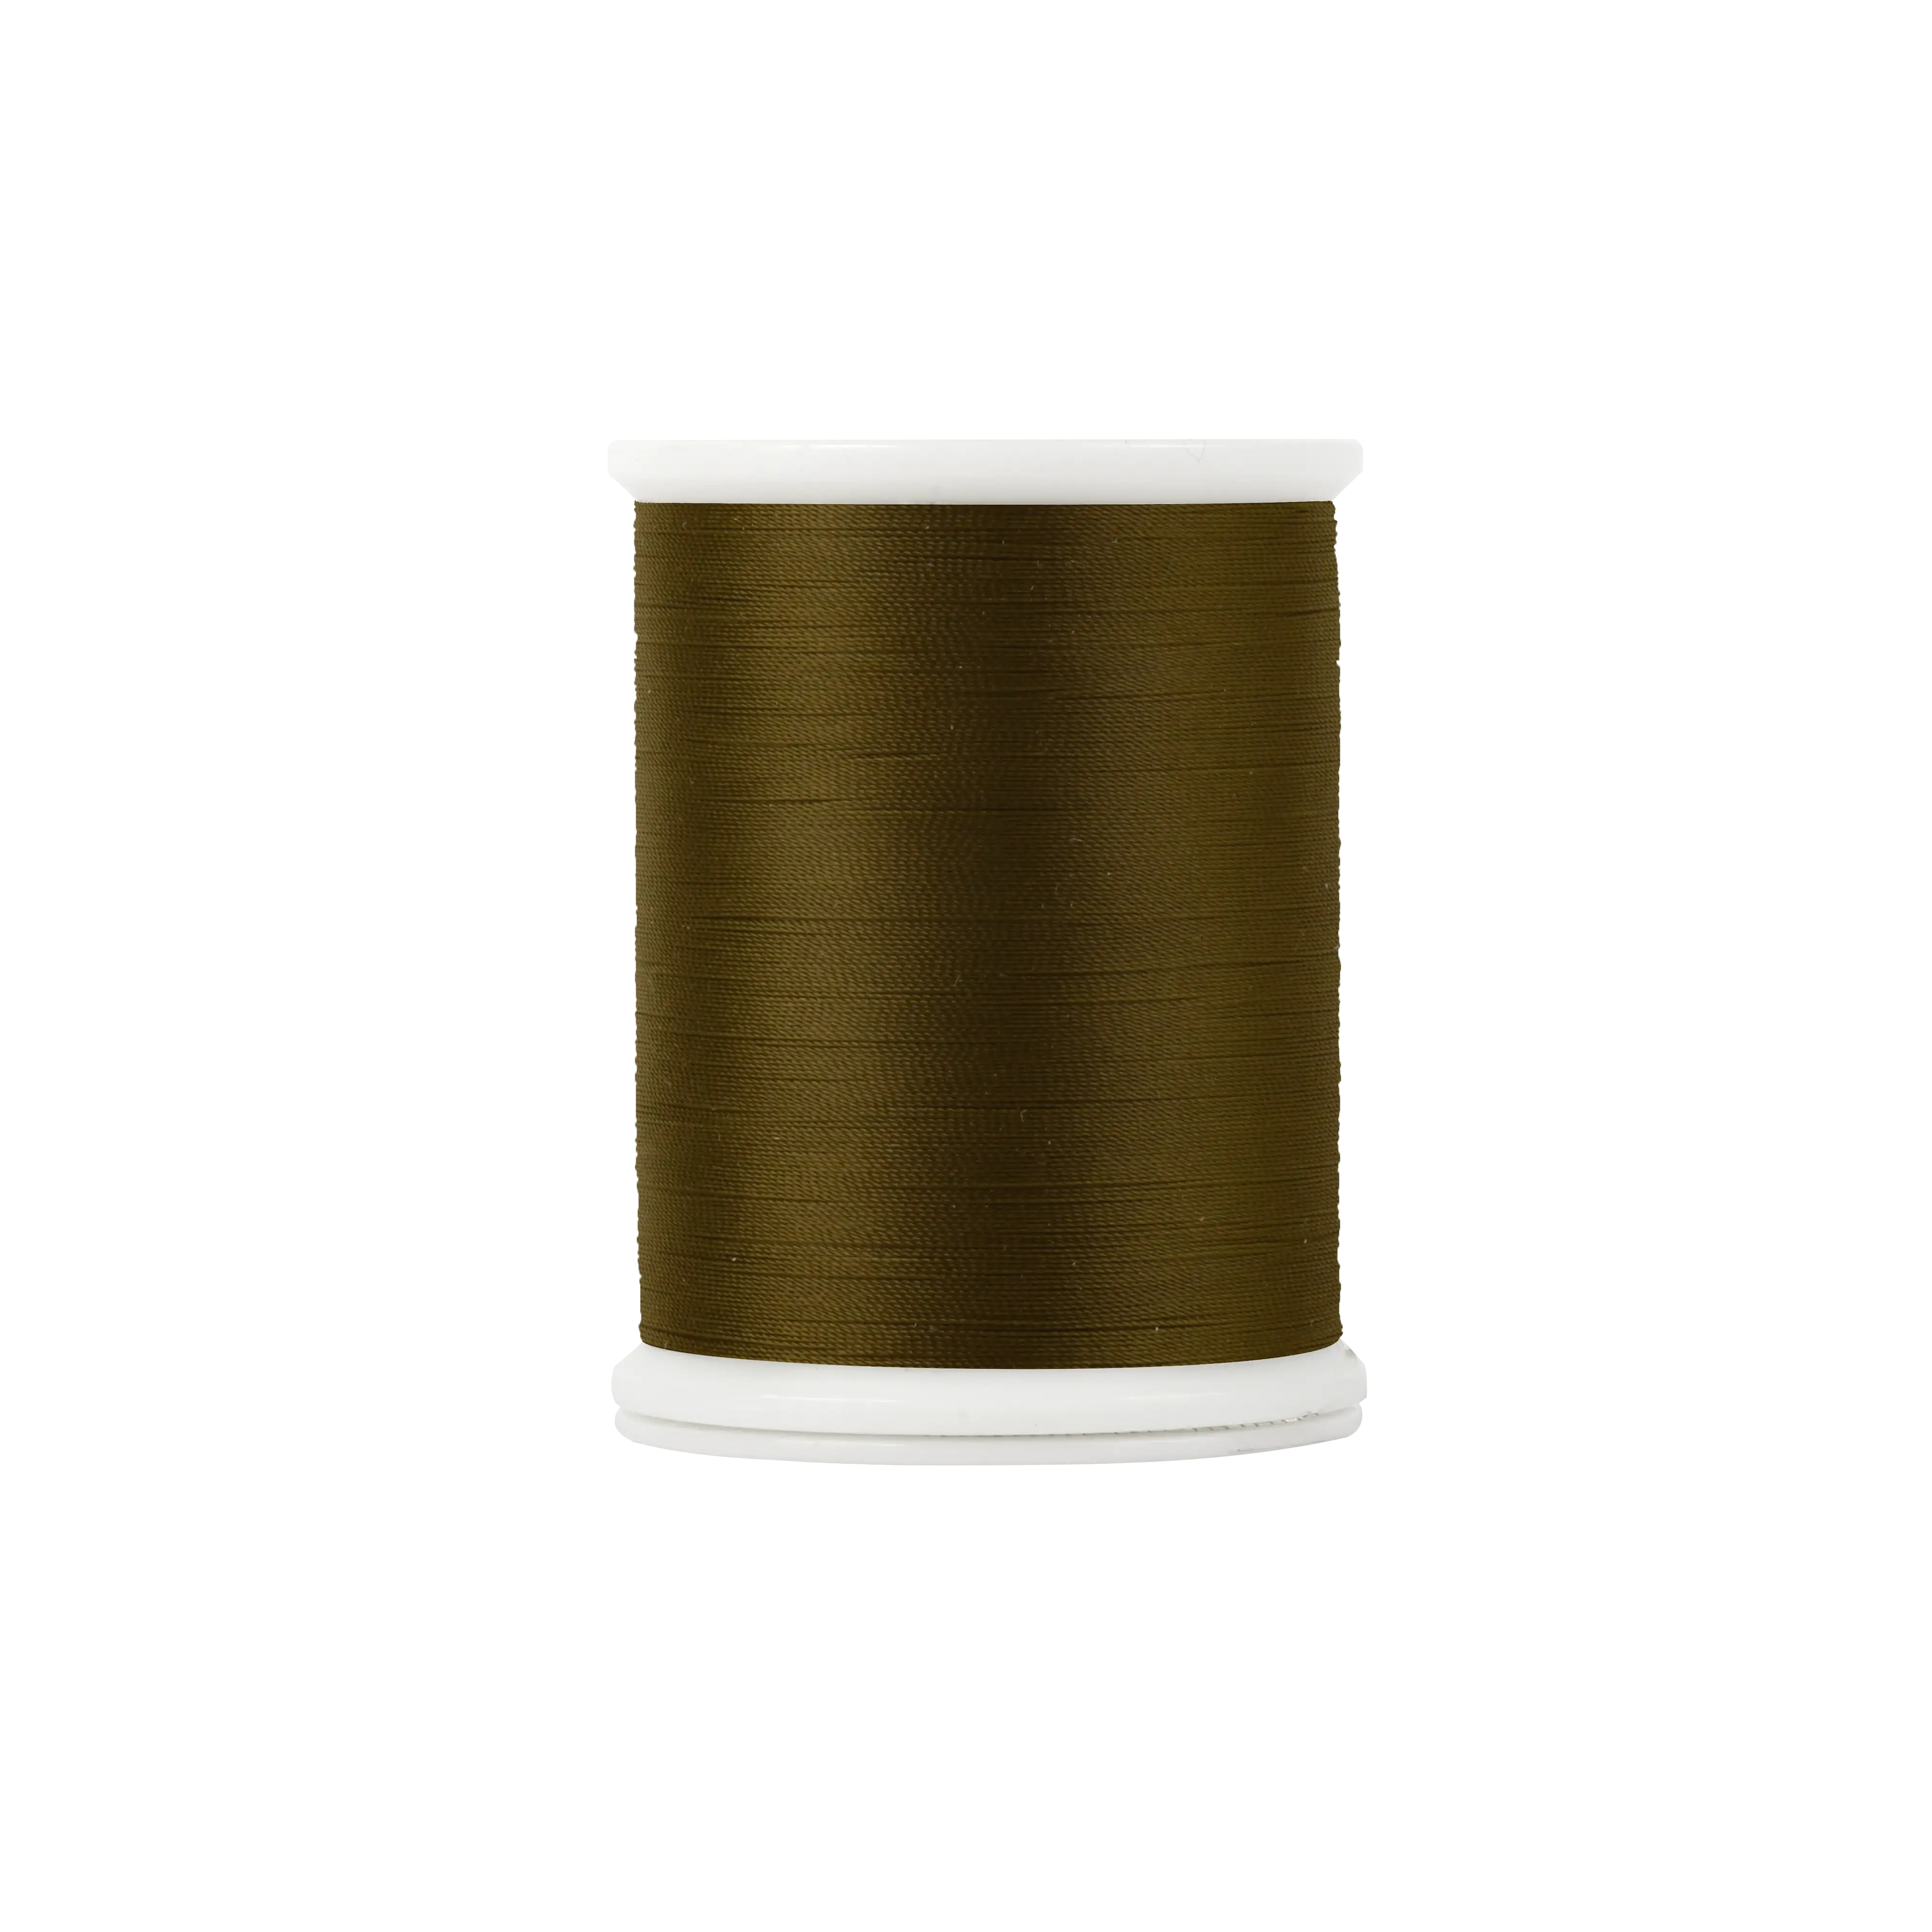 Fuji Ultra Poly UPA00 Size A 100M - Fishing Rod Wrapping Thread for Custom  Fishing Rod Building